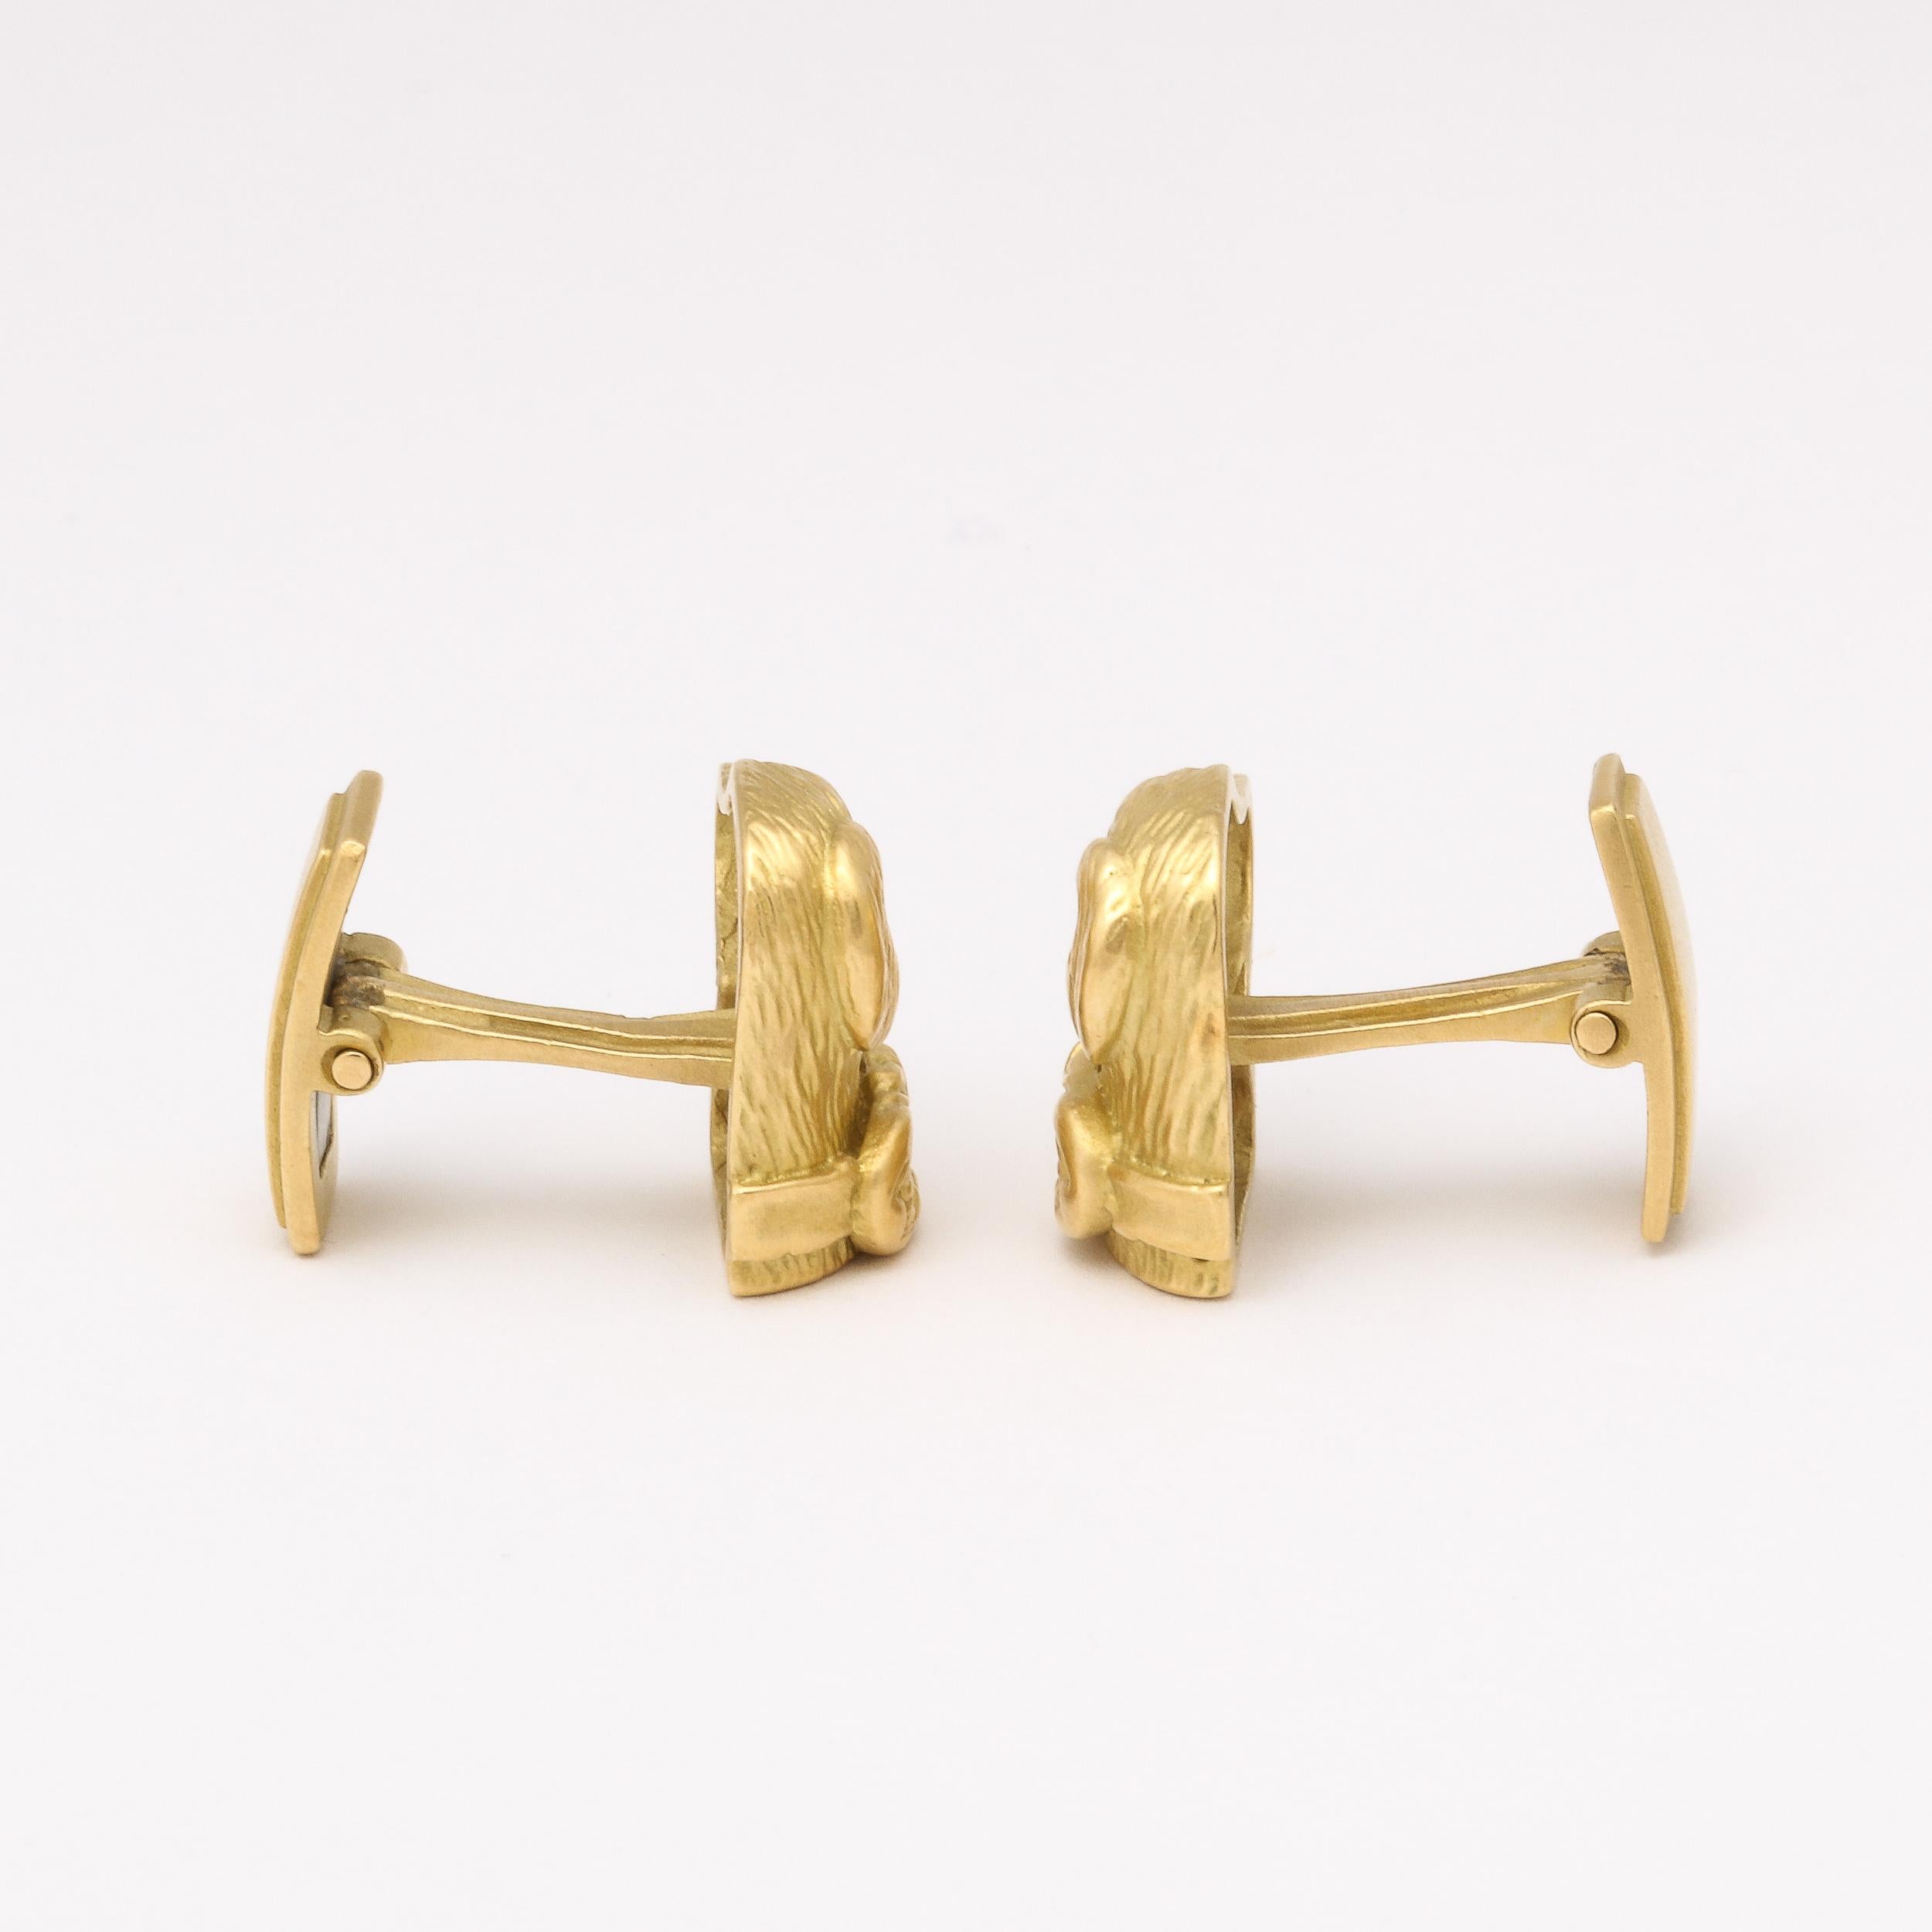 Modernist Cufflinks with Golden Retriever Canine Motif in 14 Carat Yellow Gold For Sale 1